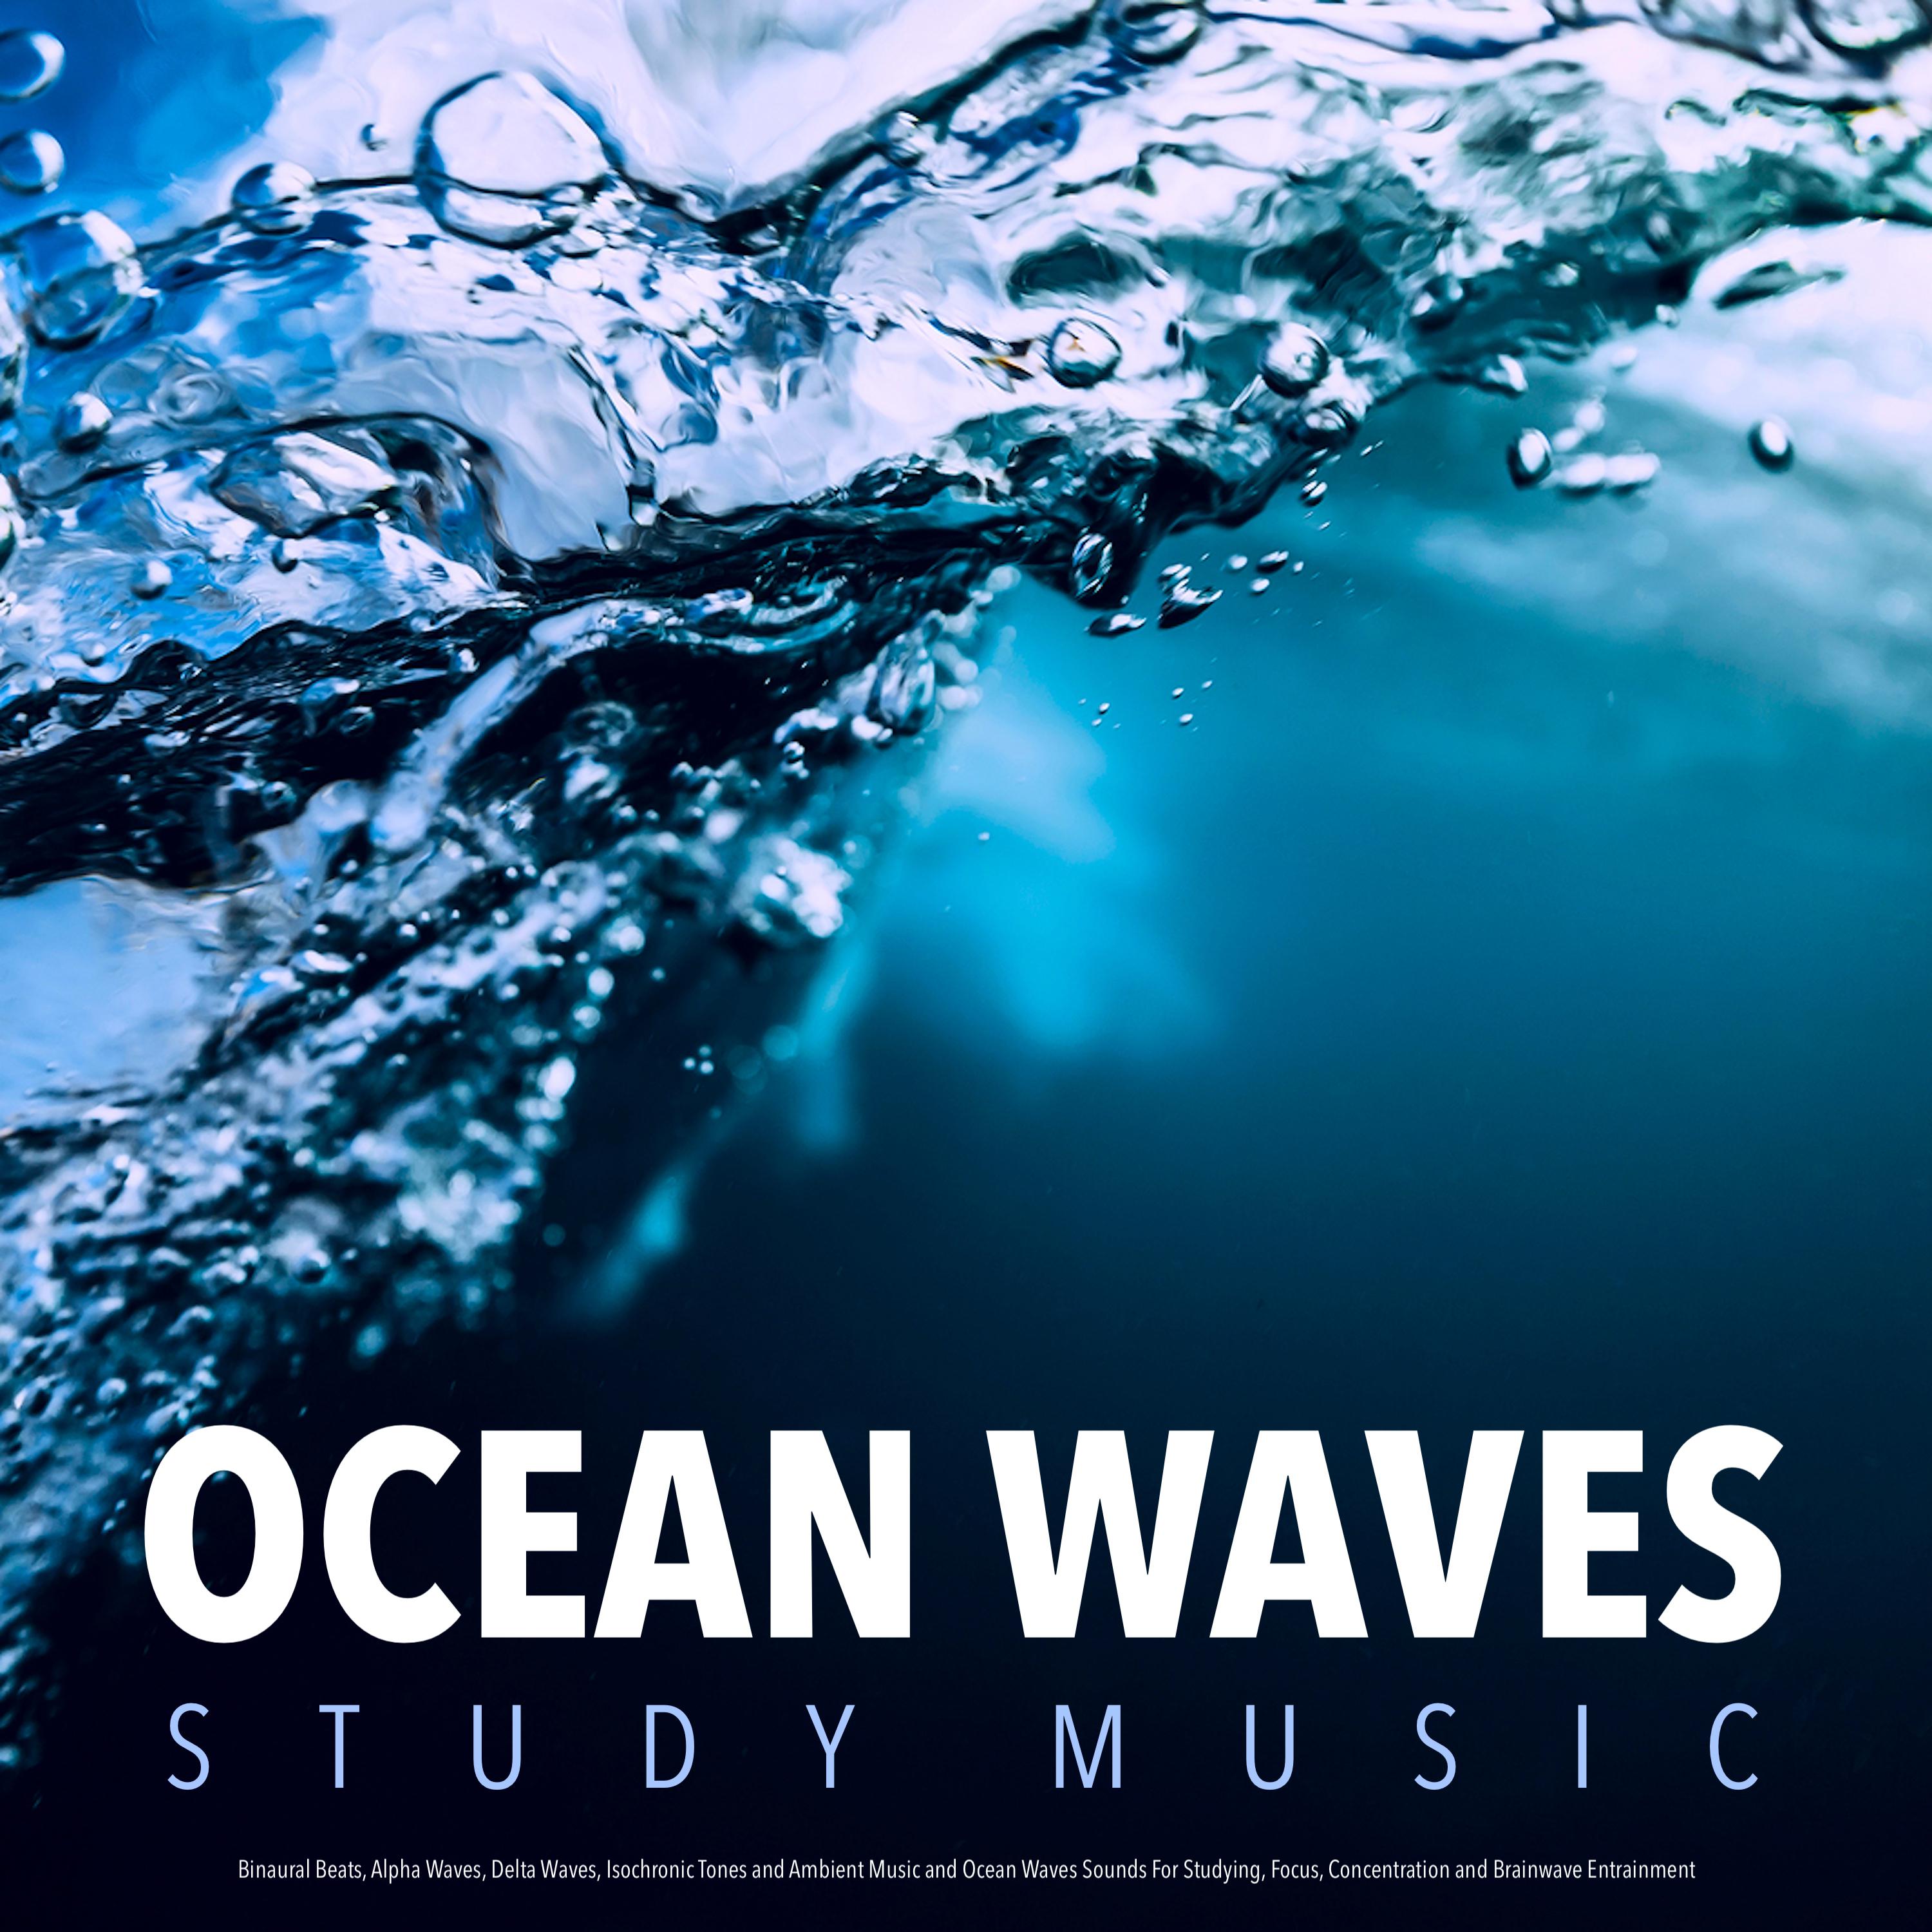 Relaxing Music with Ocean Waves For Studying